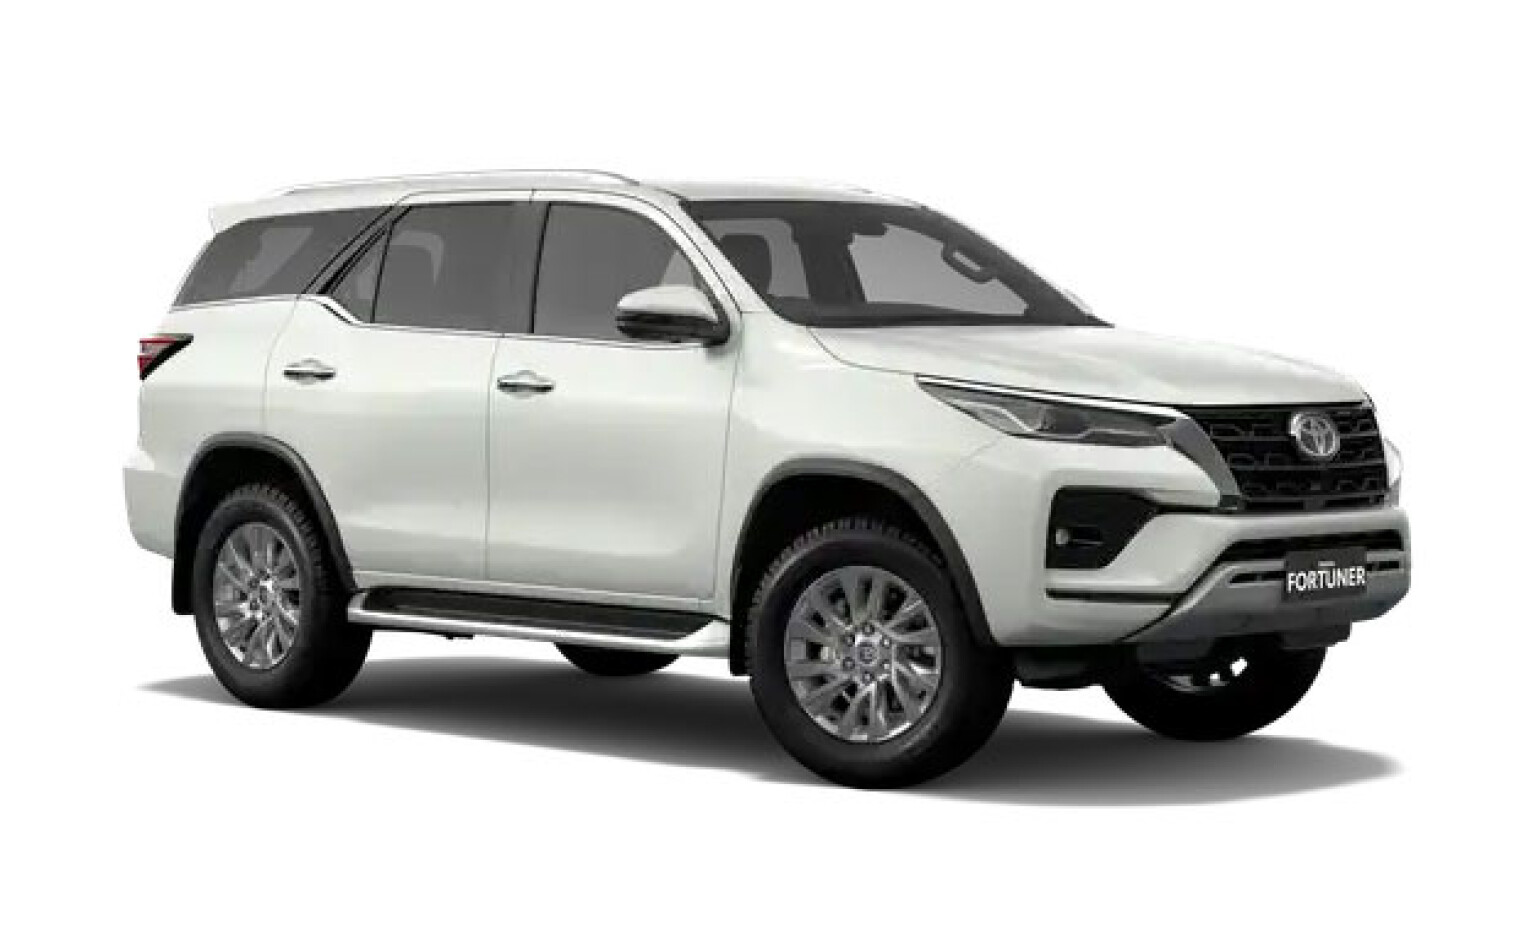 5ad50eac/toyota fortuner jpg